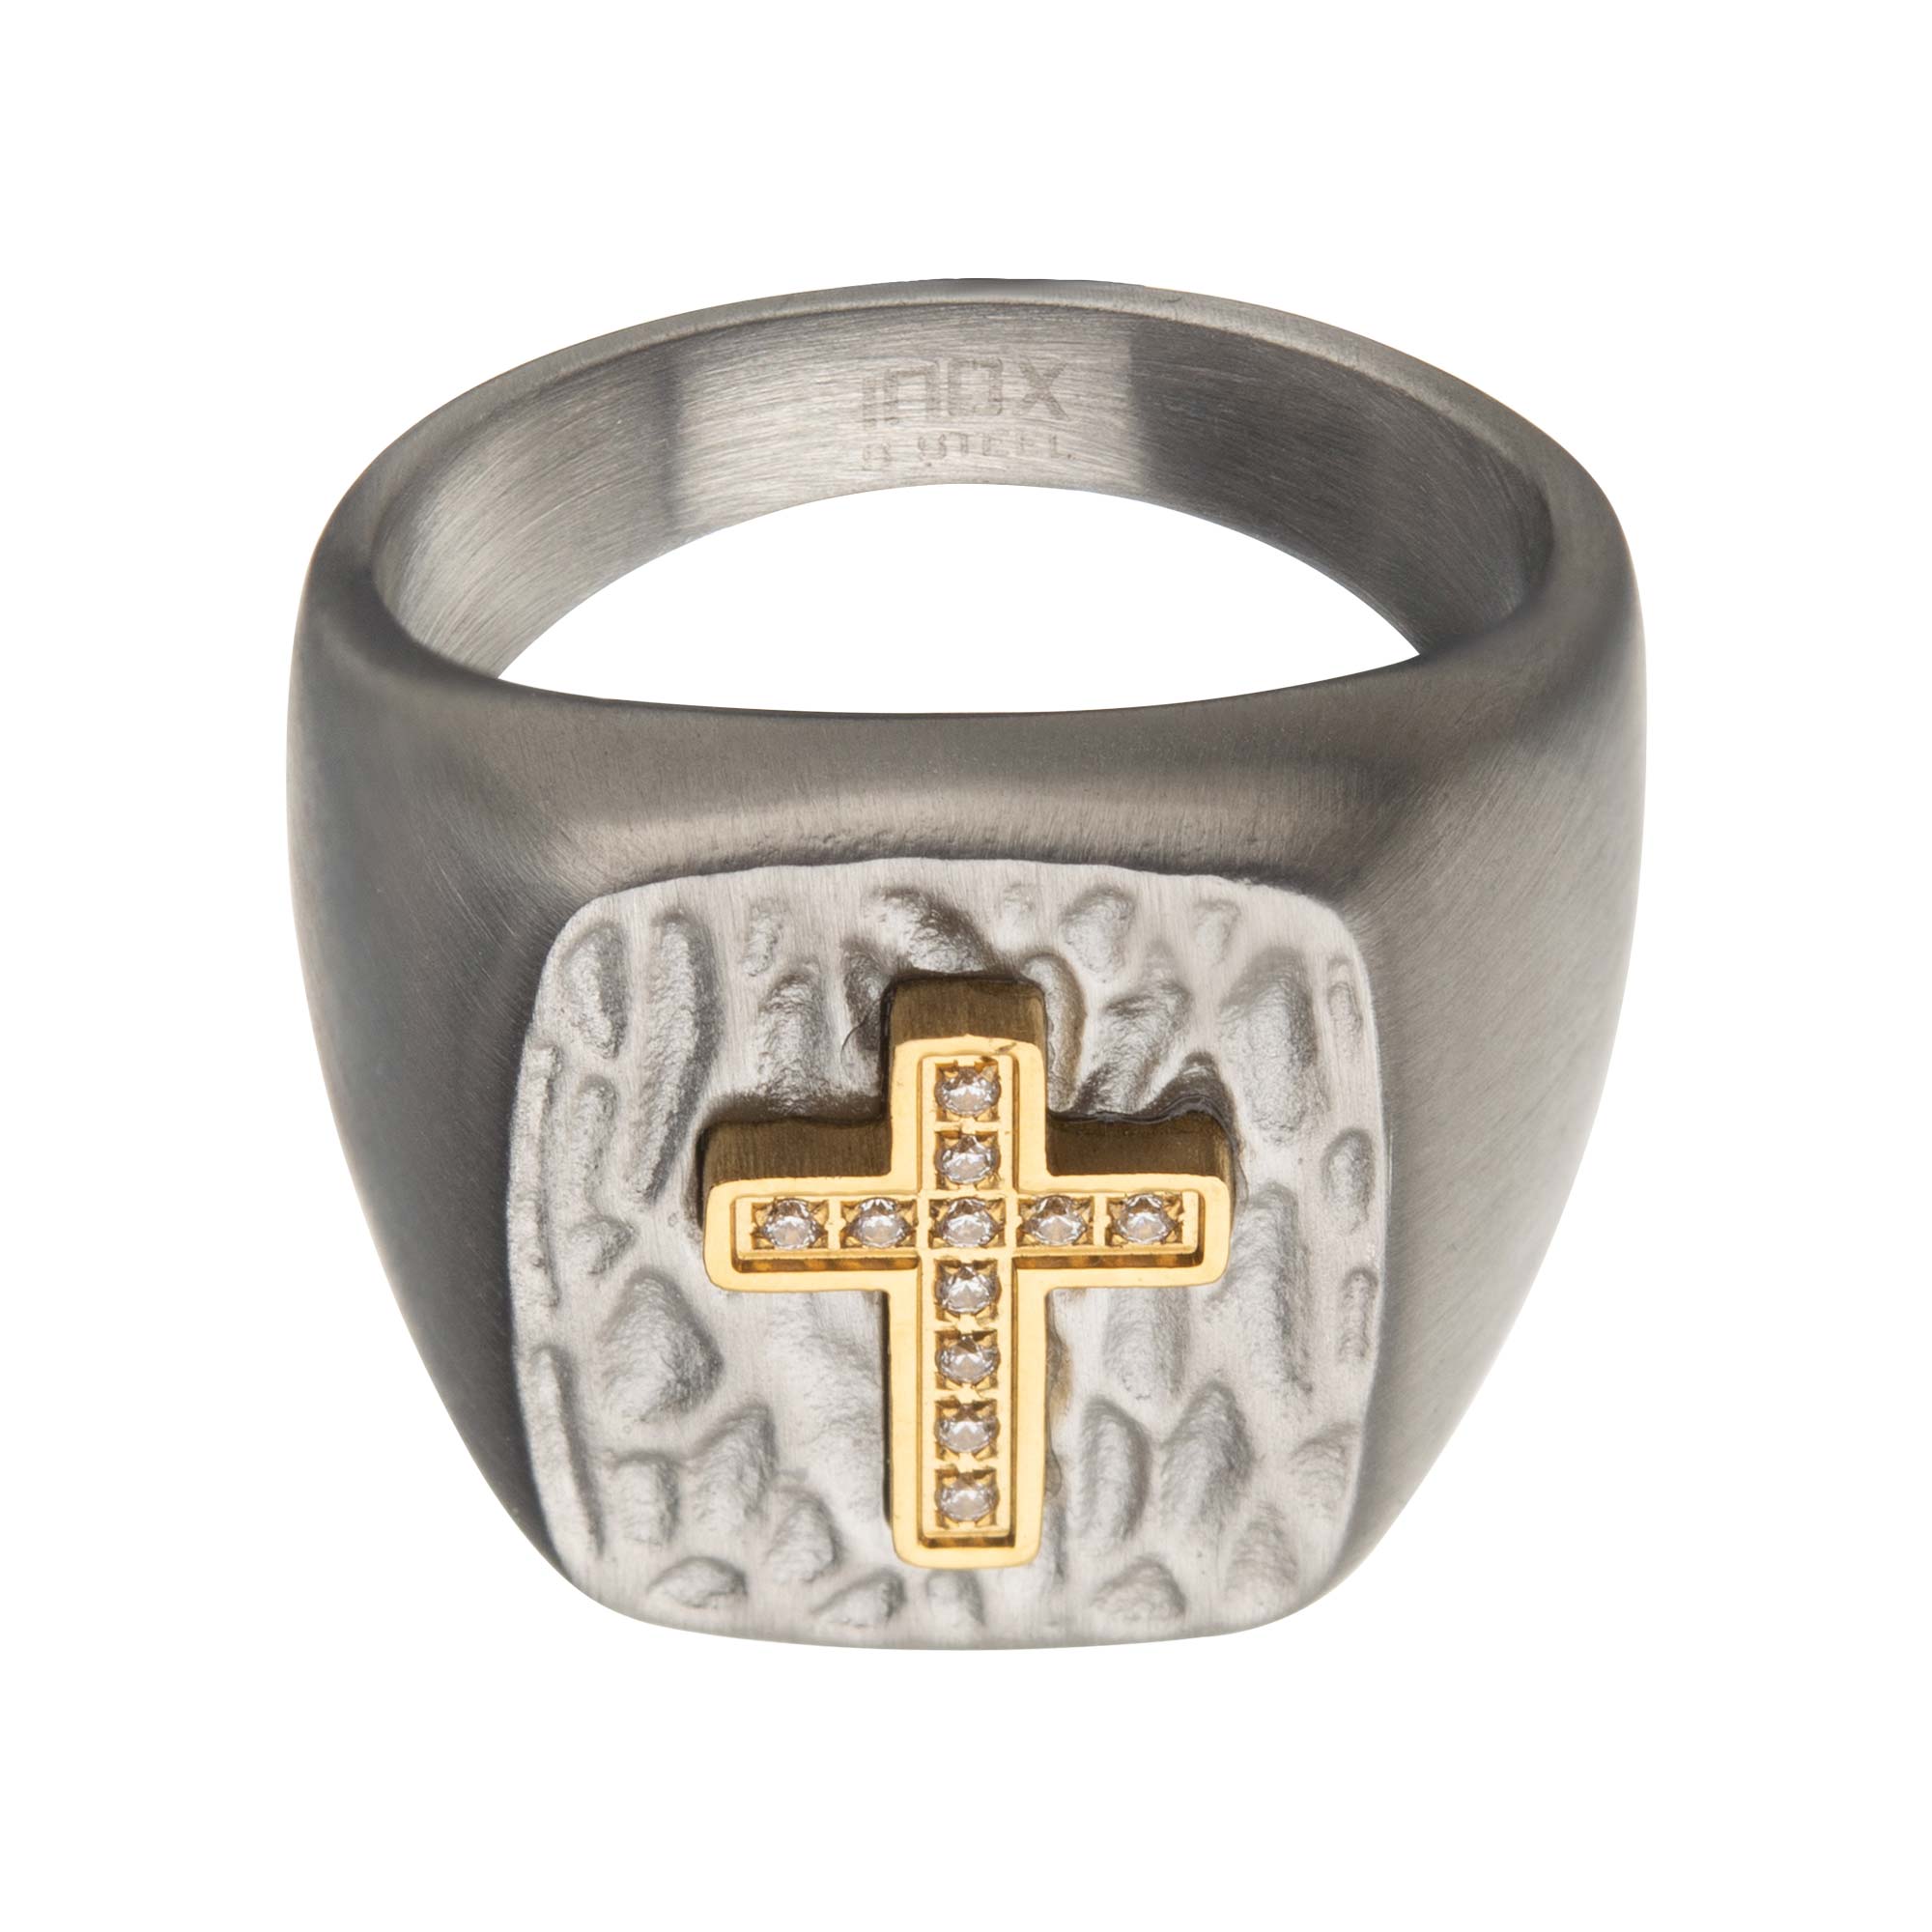 Gold Plated Cross with Clear CZs on Steel Hammered Signet Rings Image 2 Midtown Diamonds Reno, NV